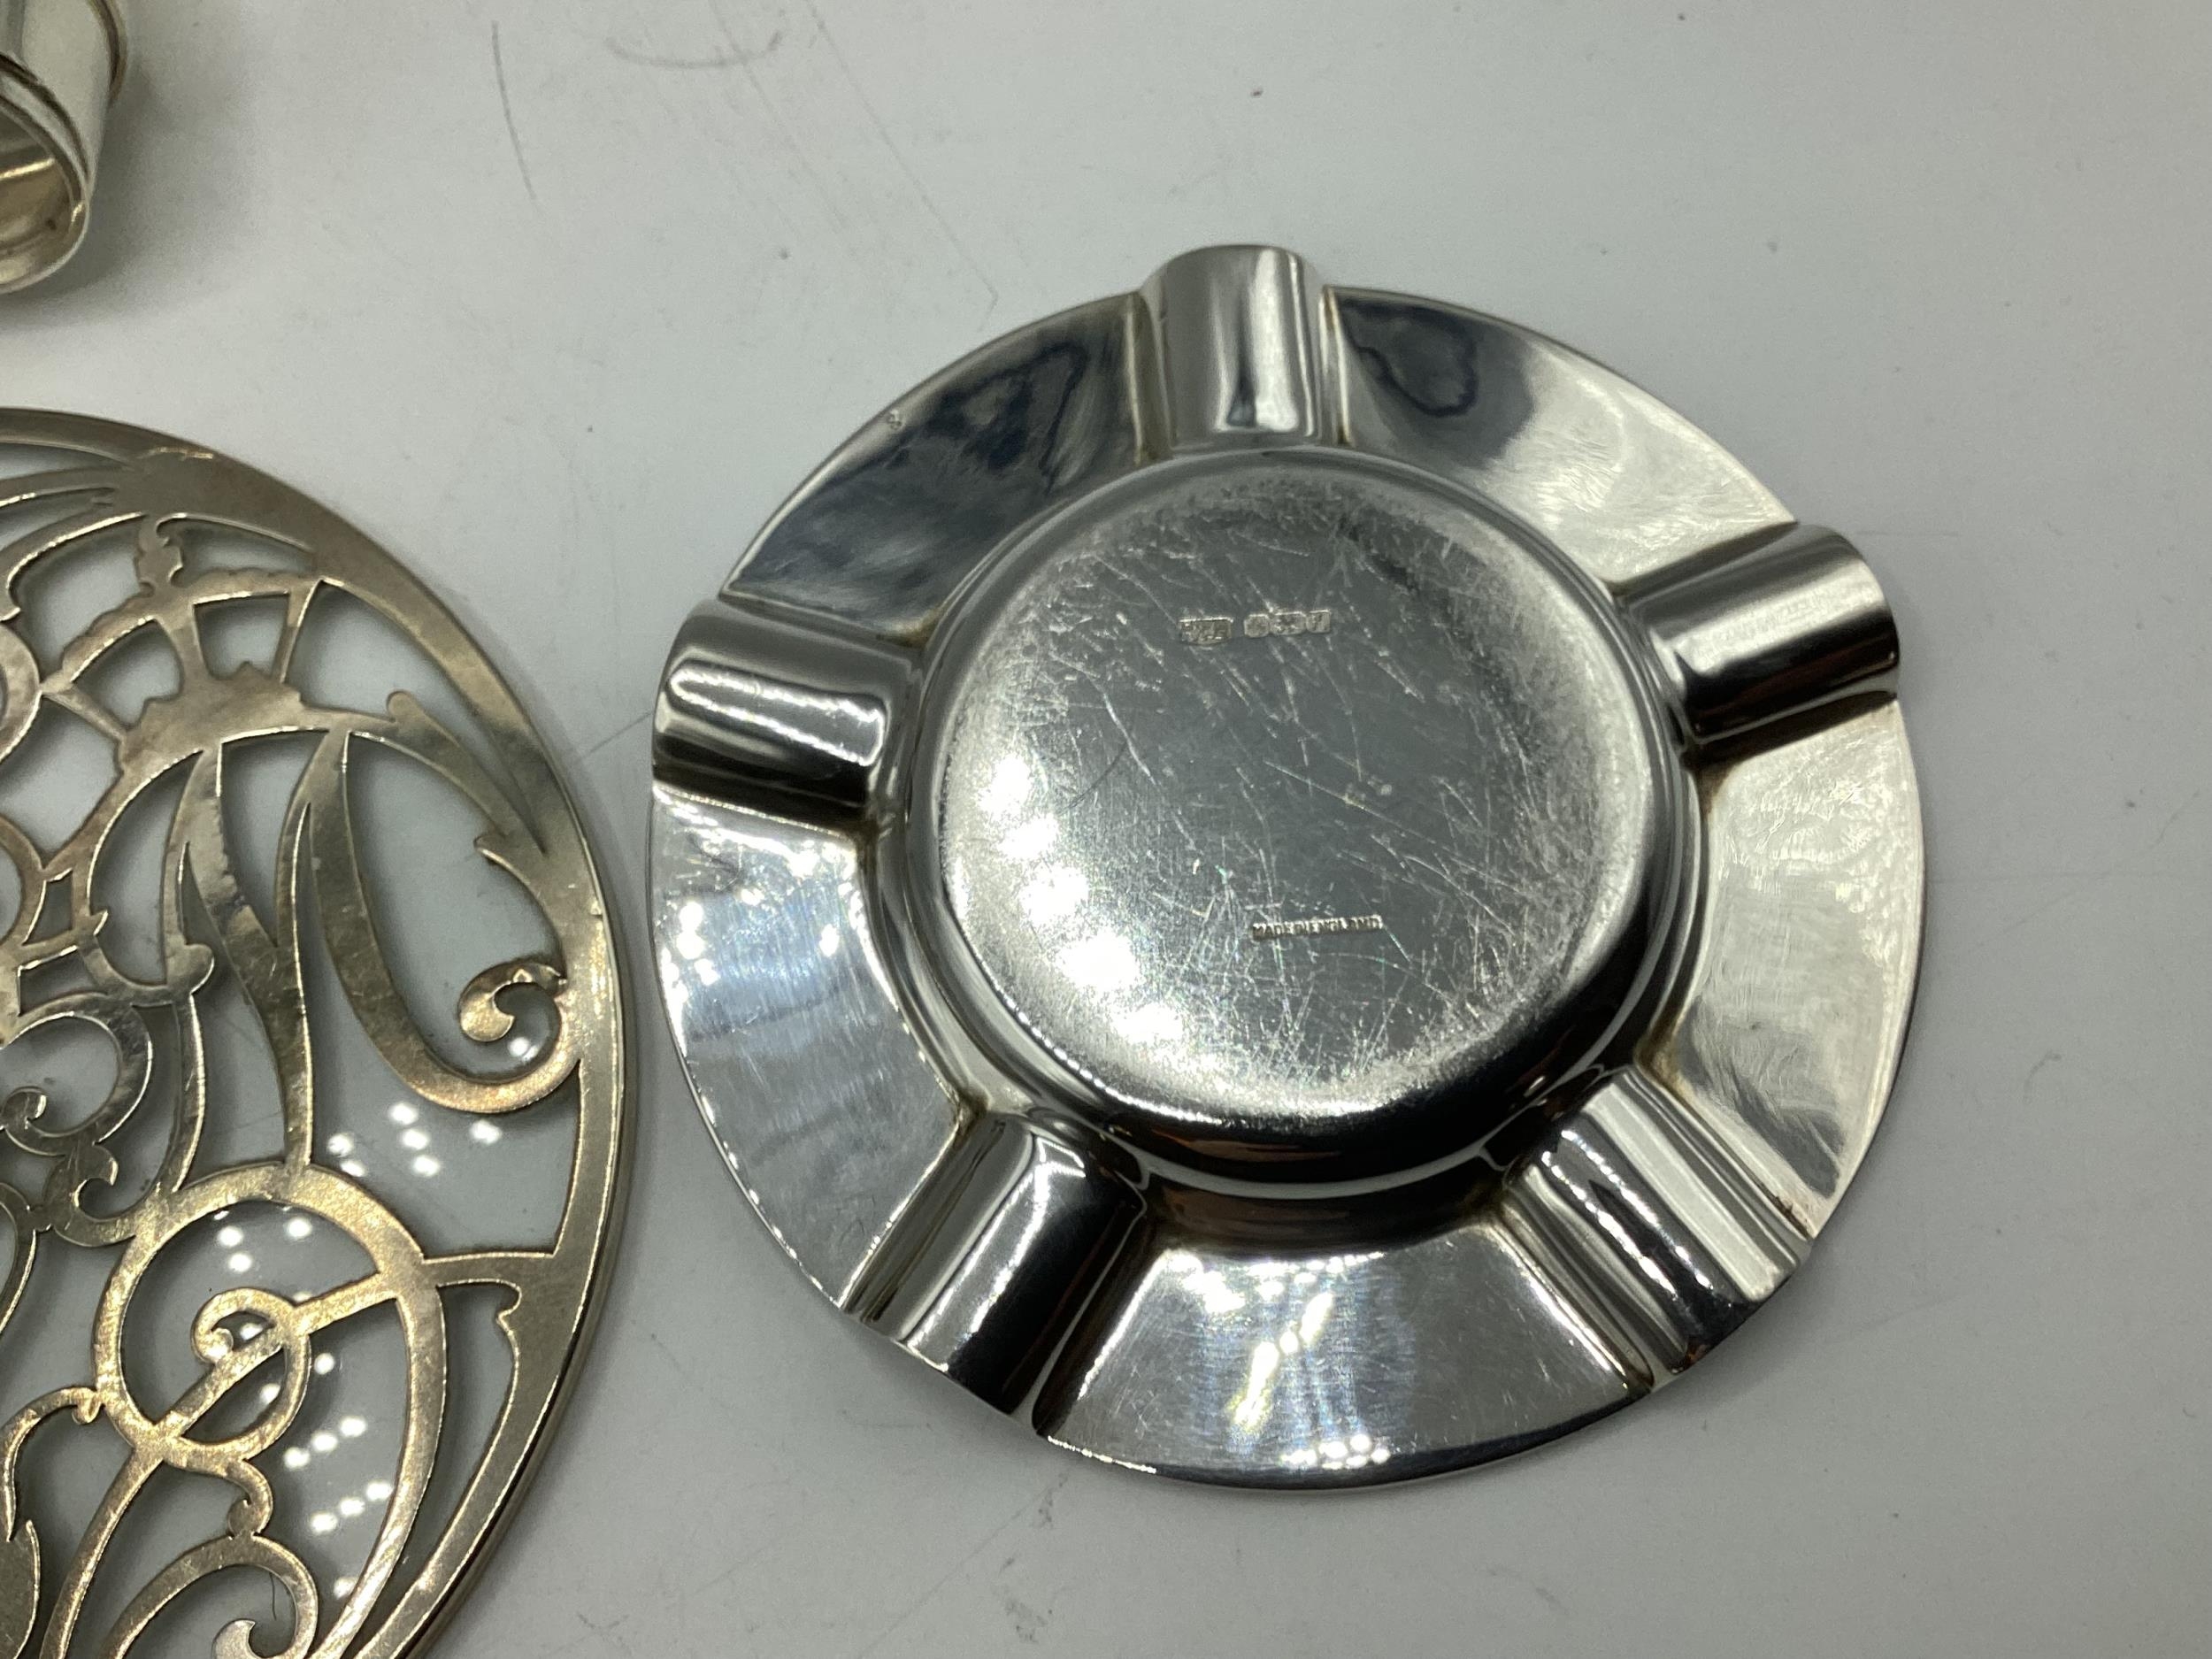 A collection of sterling silver items to include an ashtray and teapot stand, gross weight 560 g - Image 4 of 4